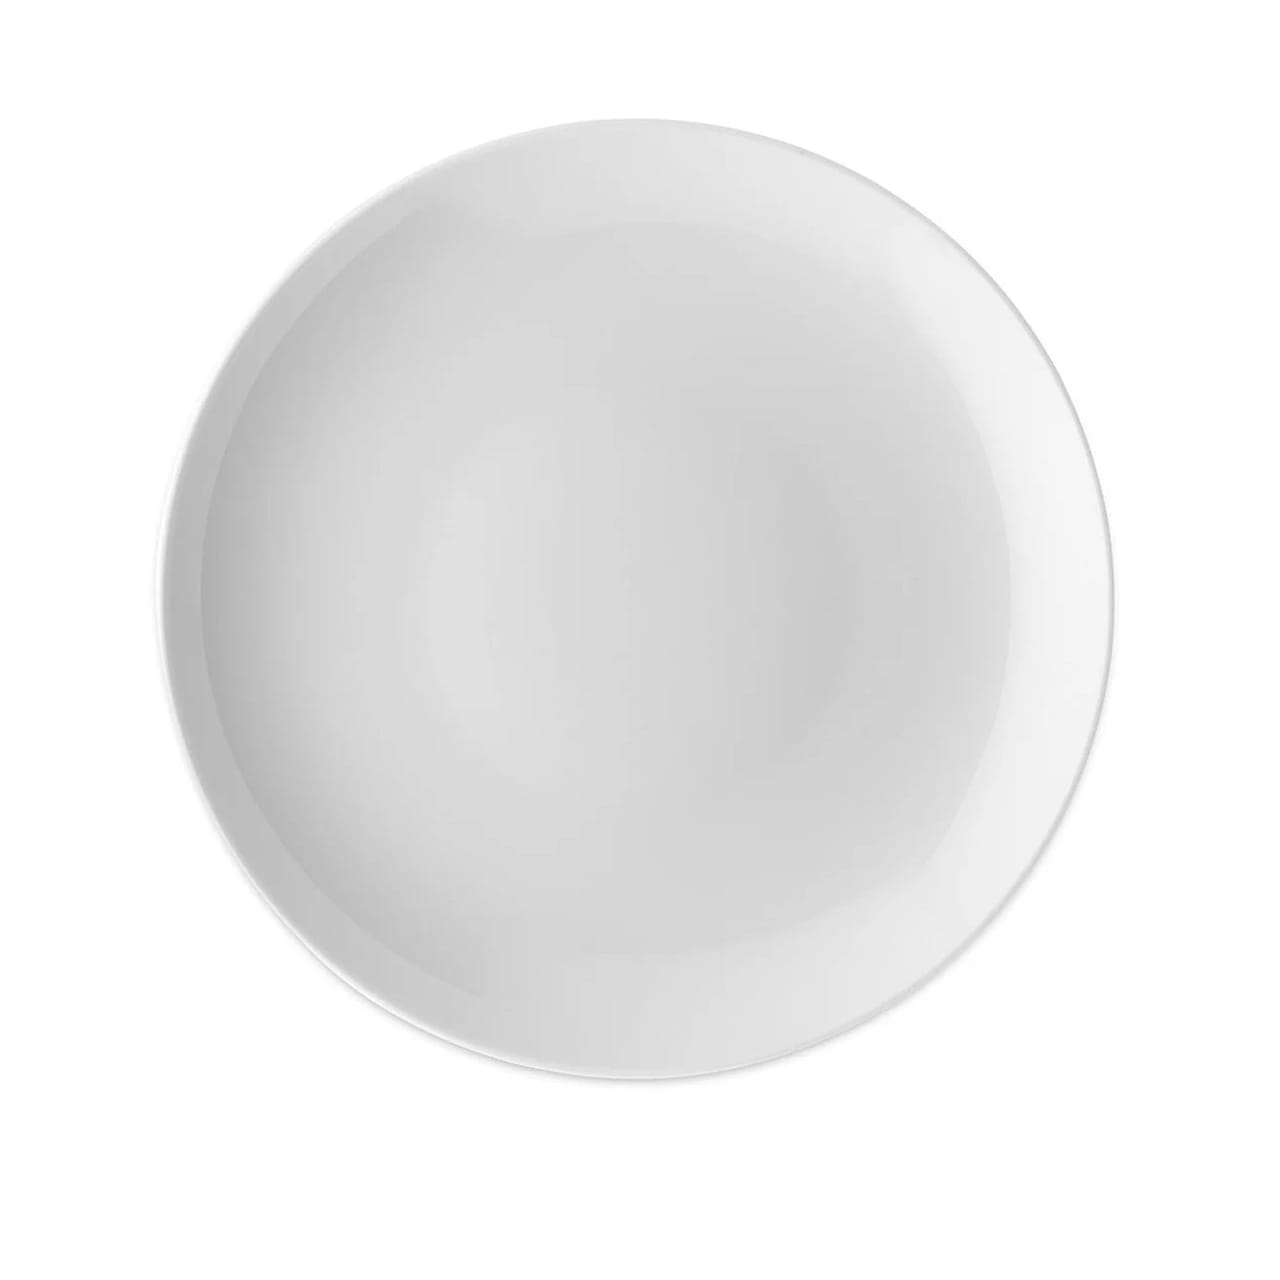 Mami Round serving plate